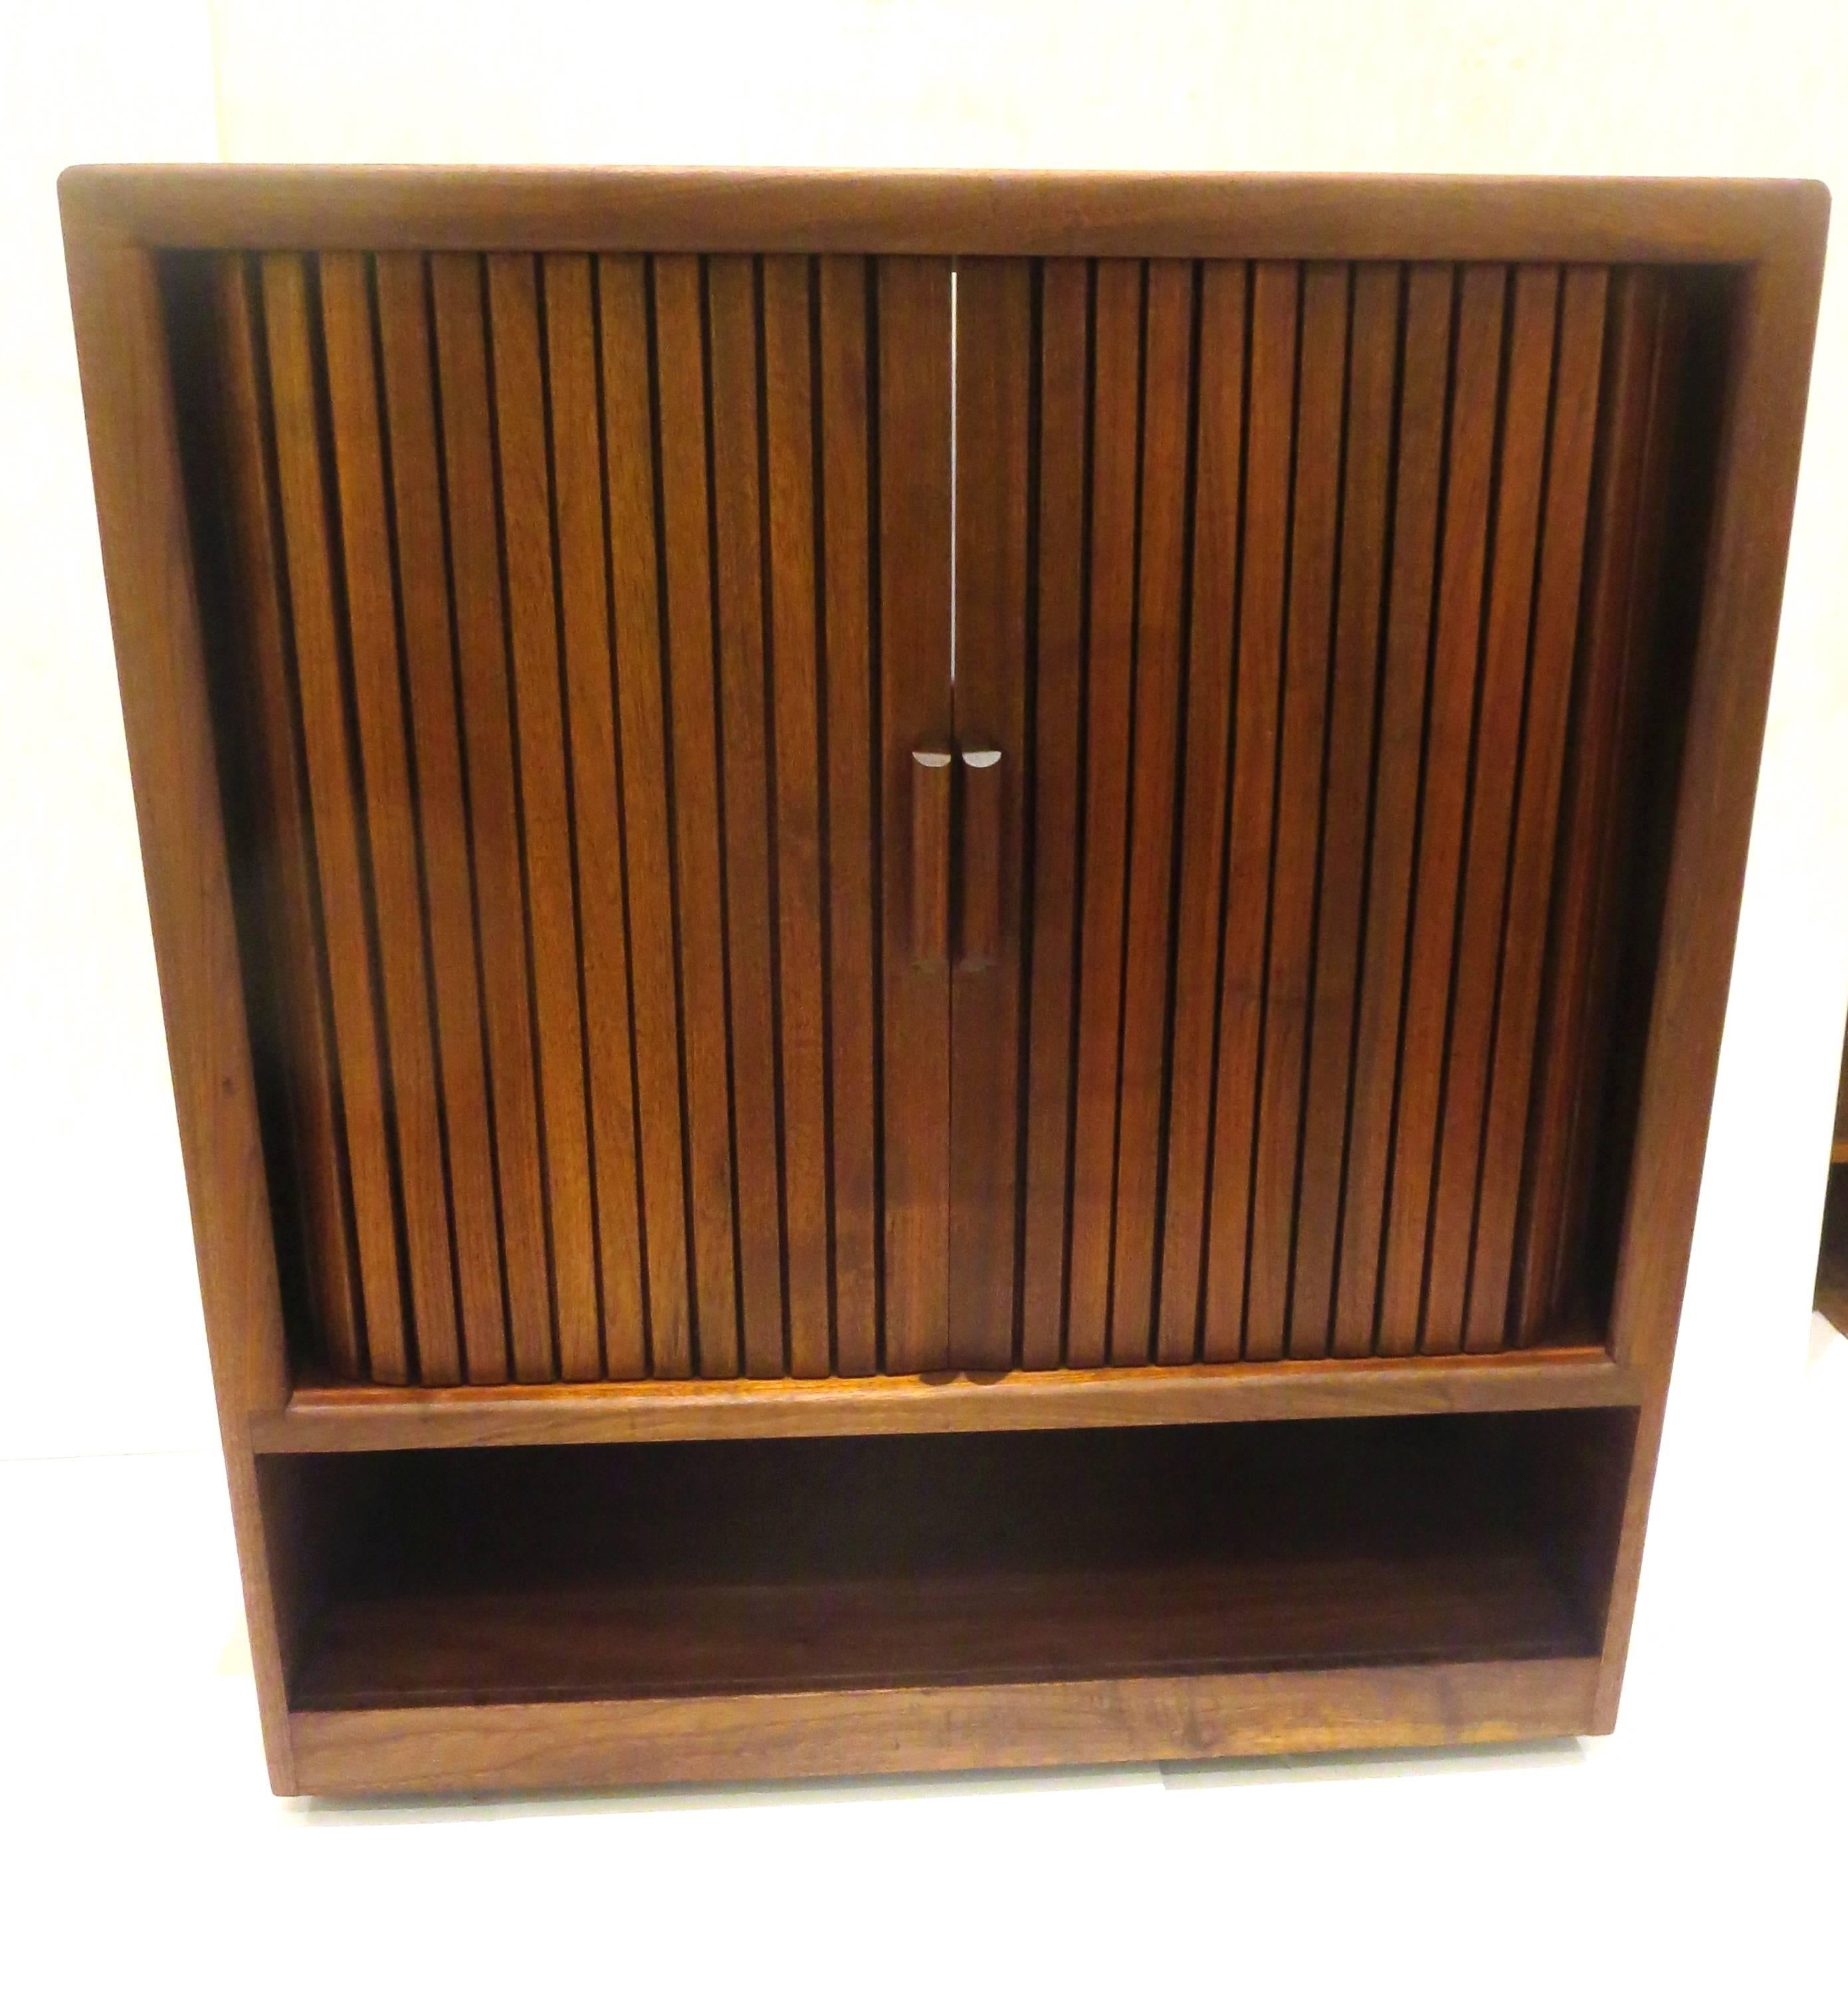 Great design on this solid walnut tambour door media cabinet designed by Lou Hodges, circa 1970s tambour door and lower compartment, for storage can be used as mini bar, or for records versatile and unique in nice freshly refinished walnut, sitting